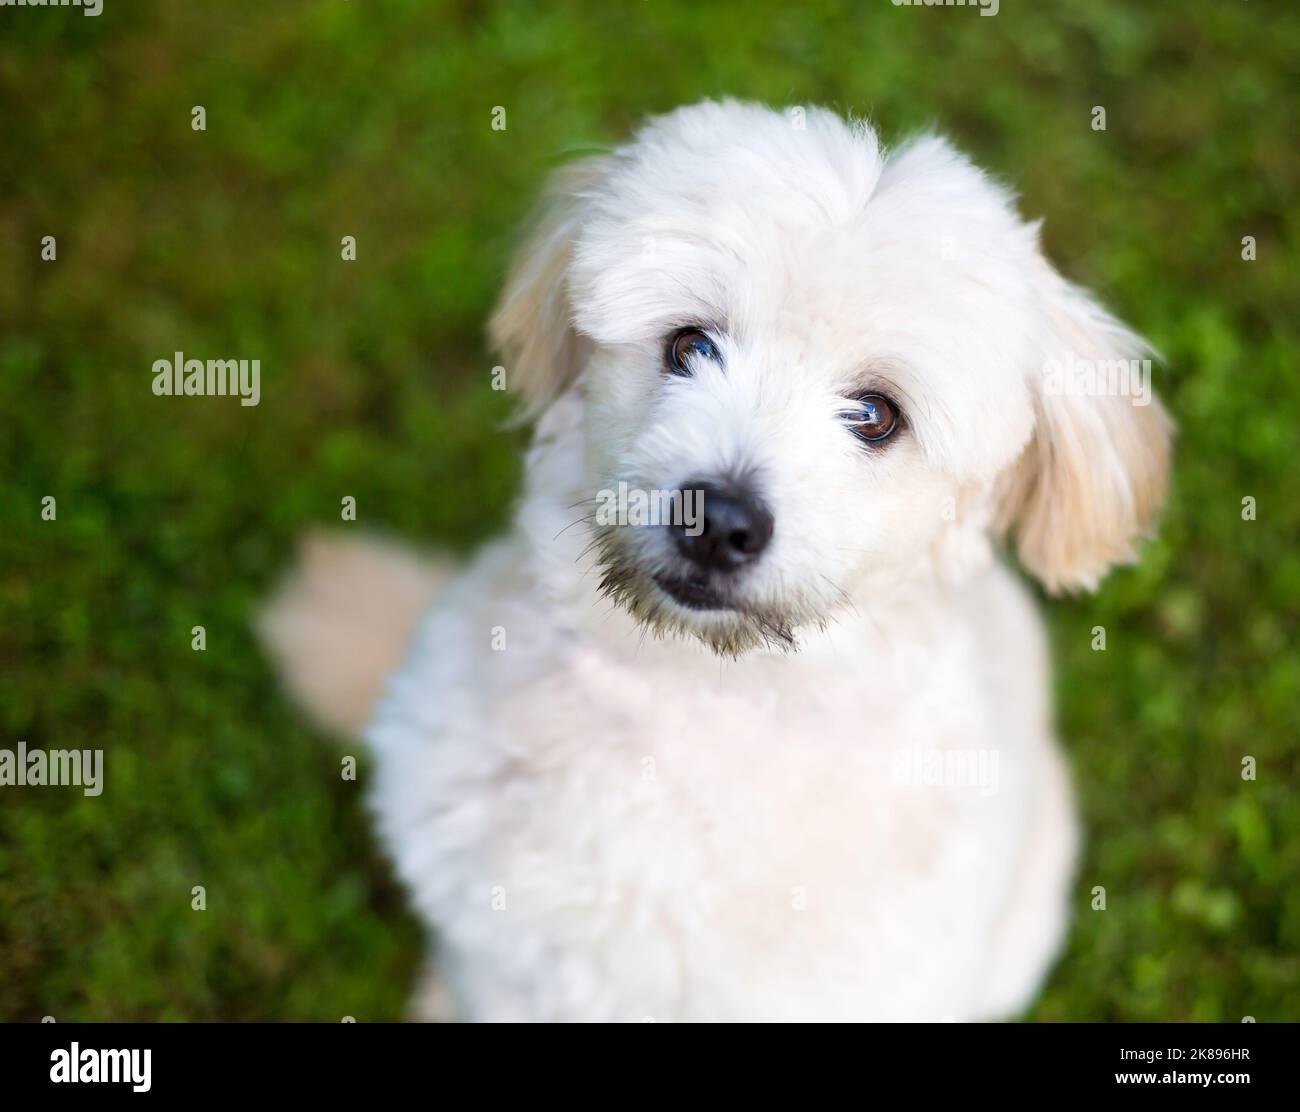 A cute Pomeranian x Poodle mixed breed dog looking up with a head tilt Stock Photo